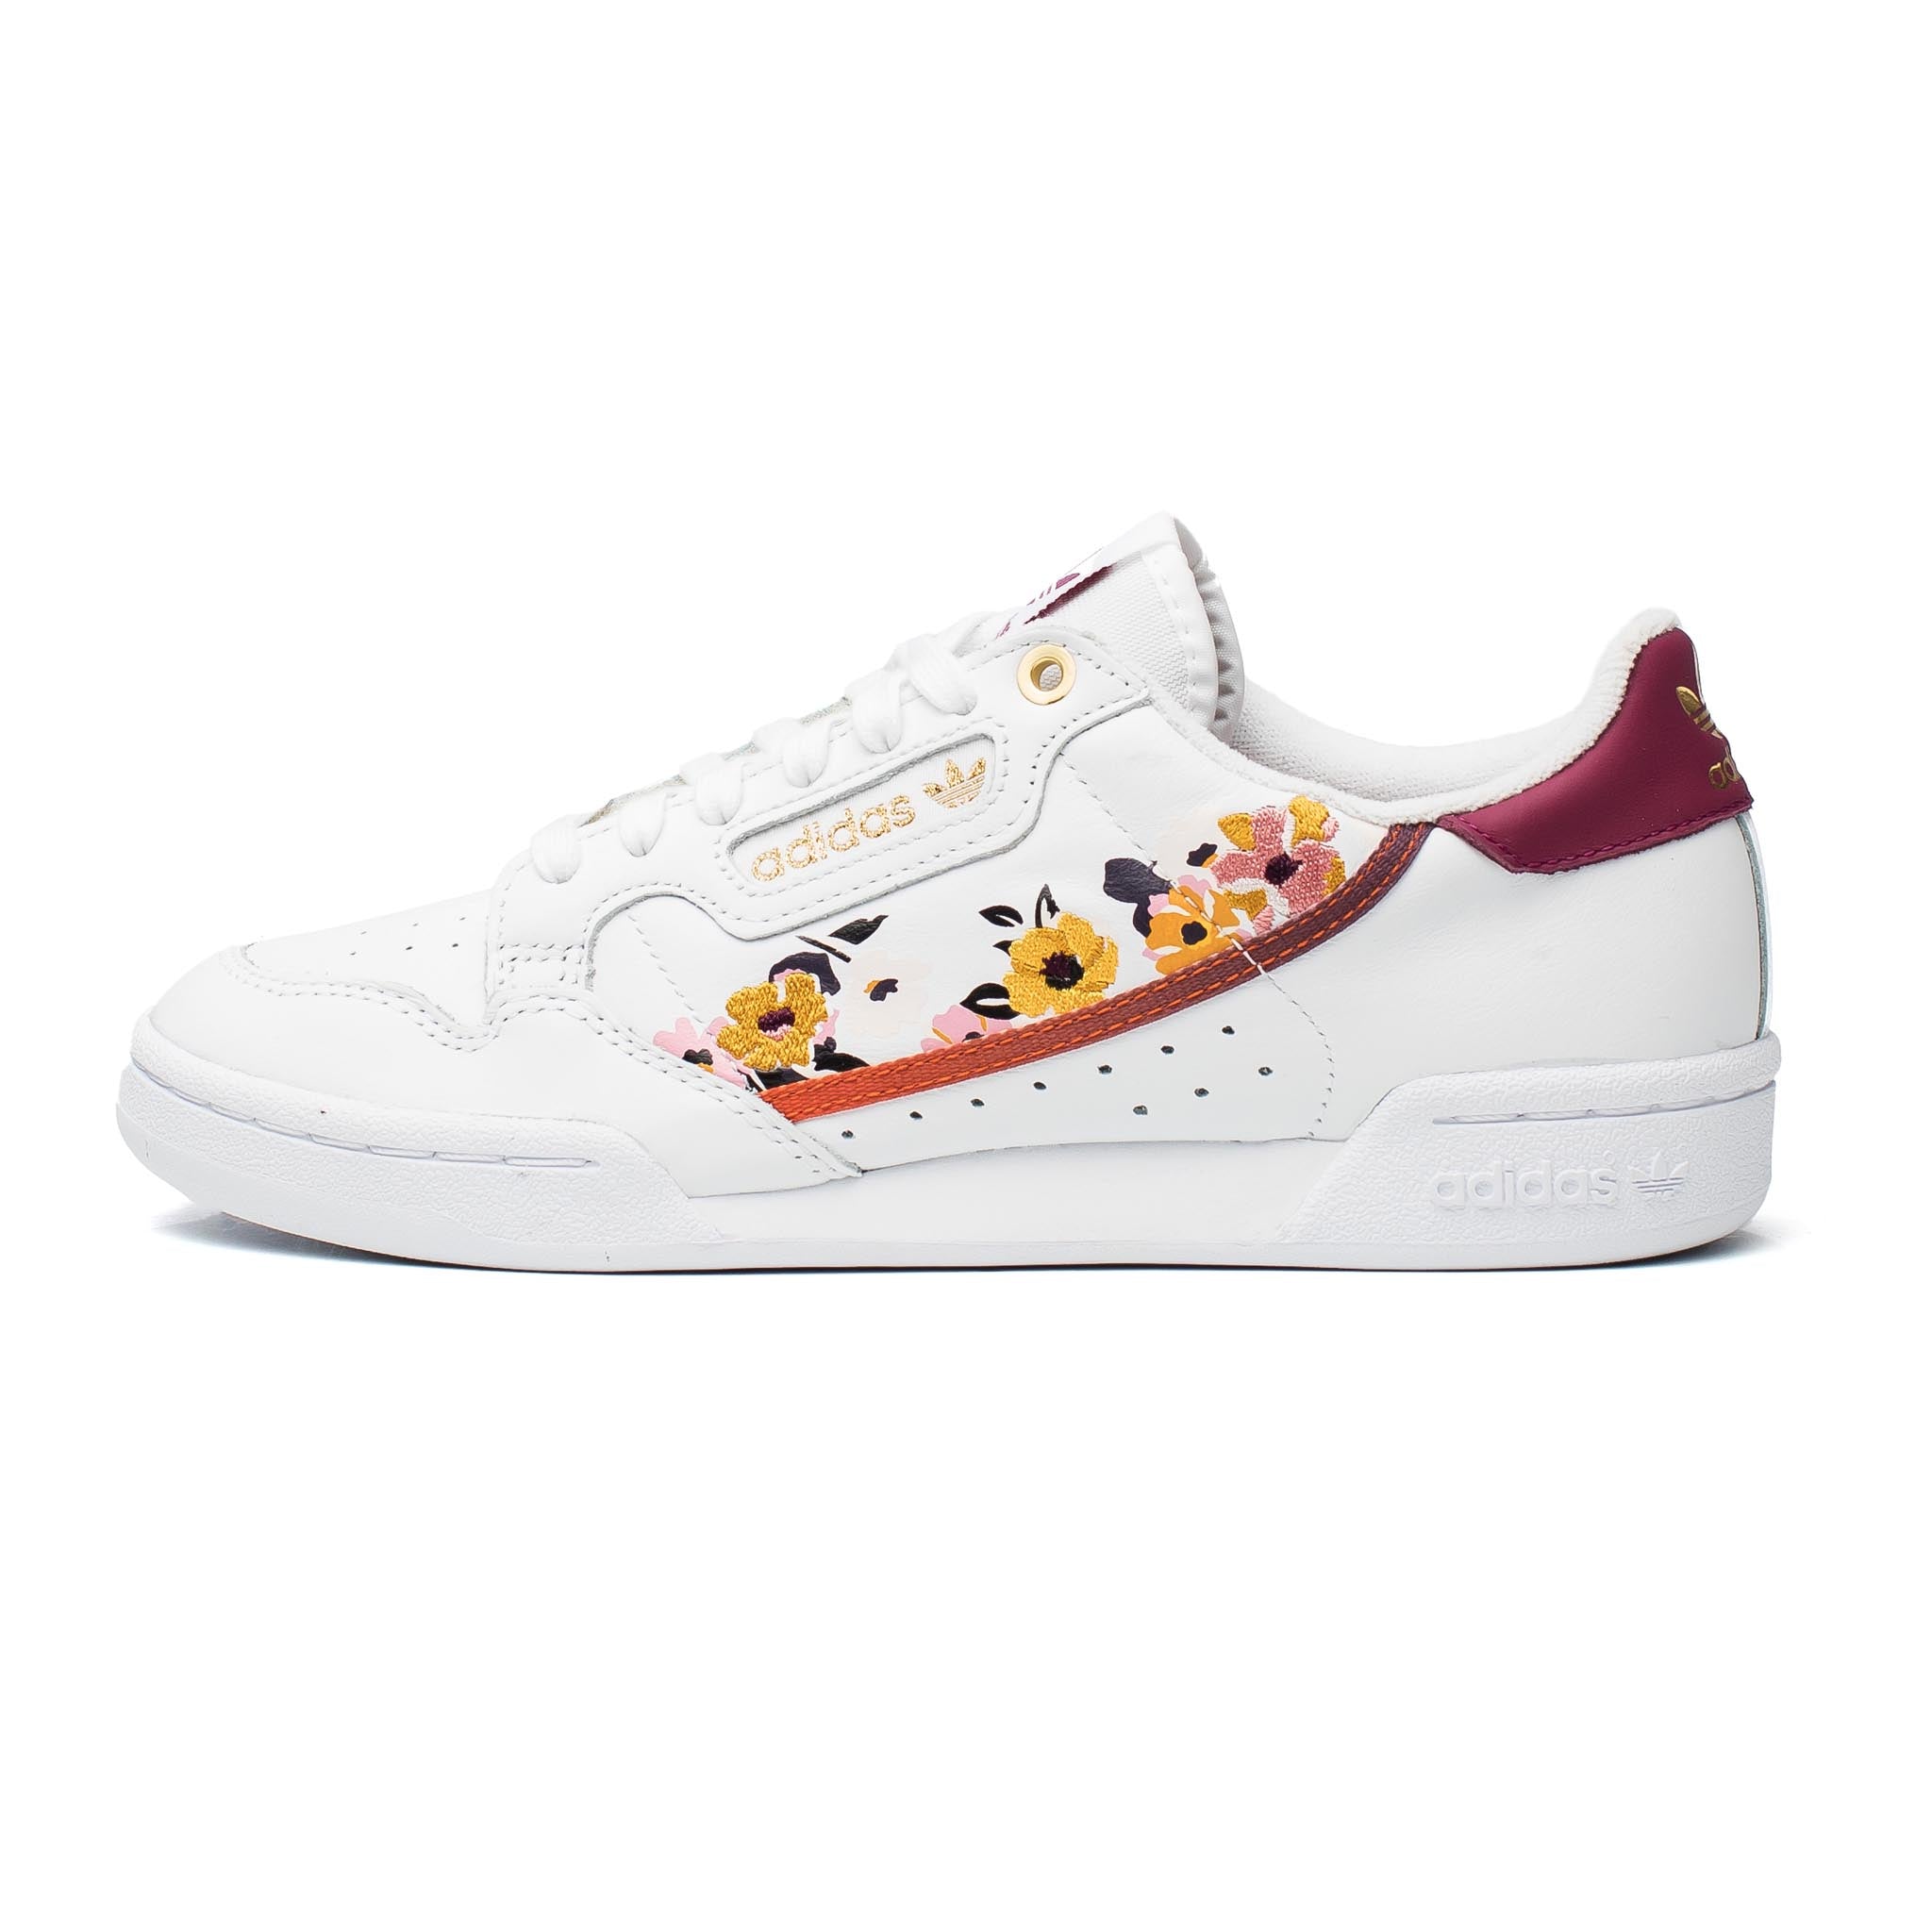 ADIDAS x HER Studio London Continental 80 Cloud White/Power Berry